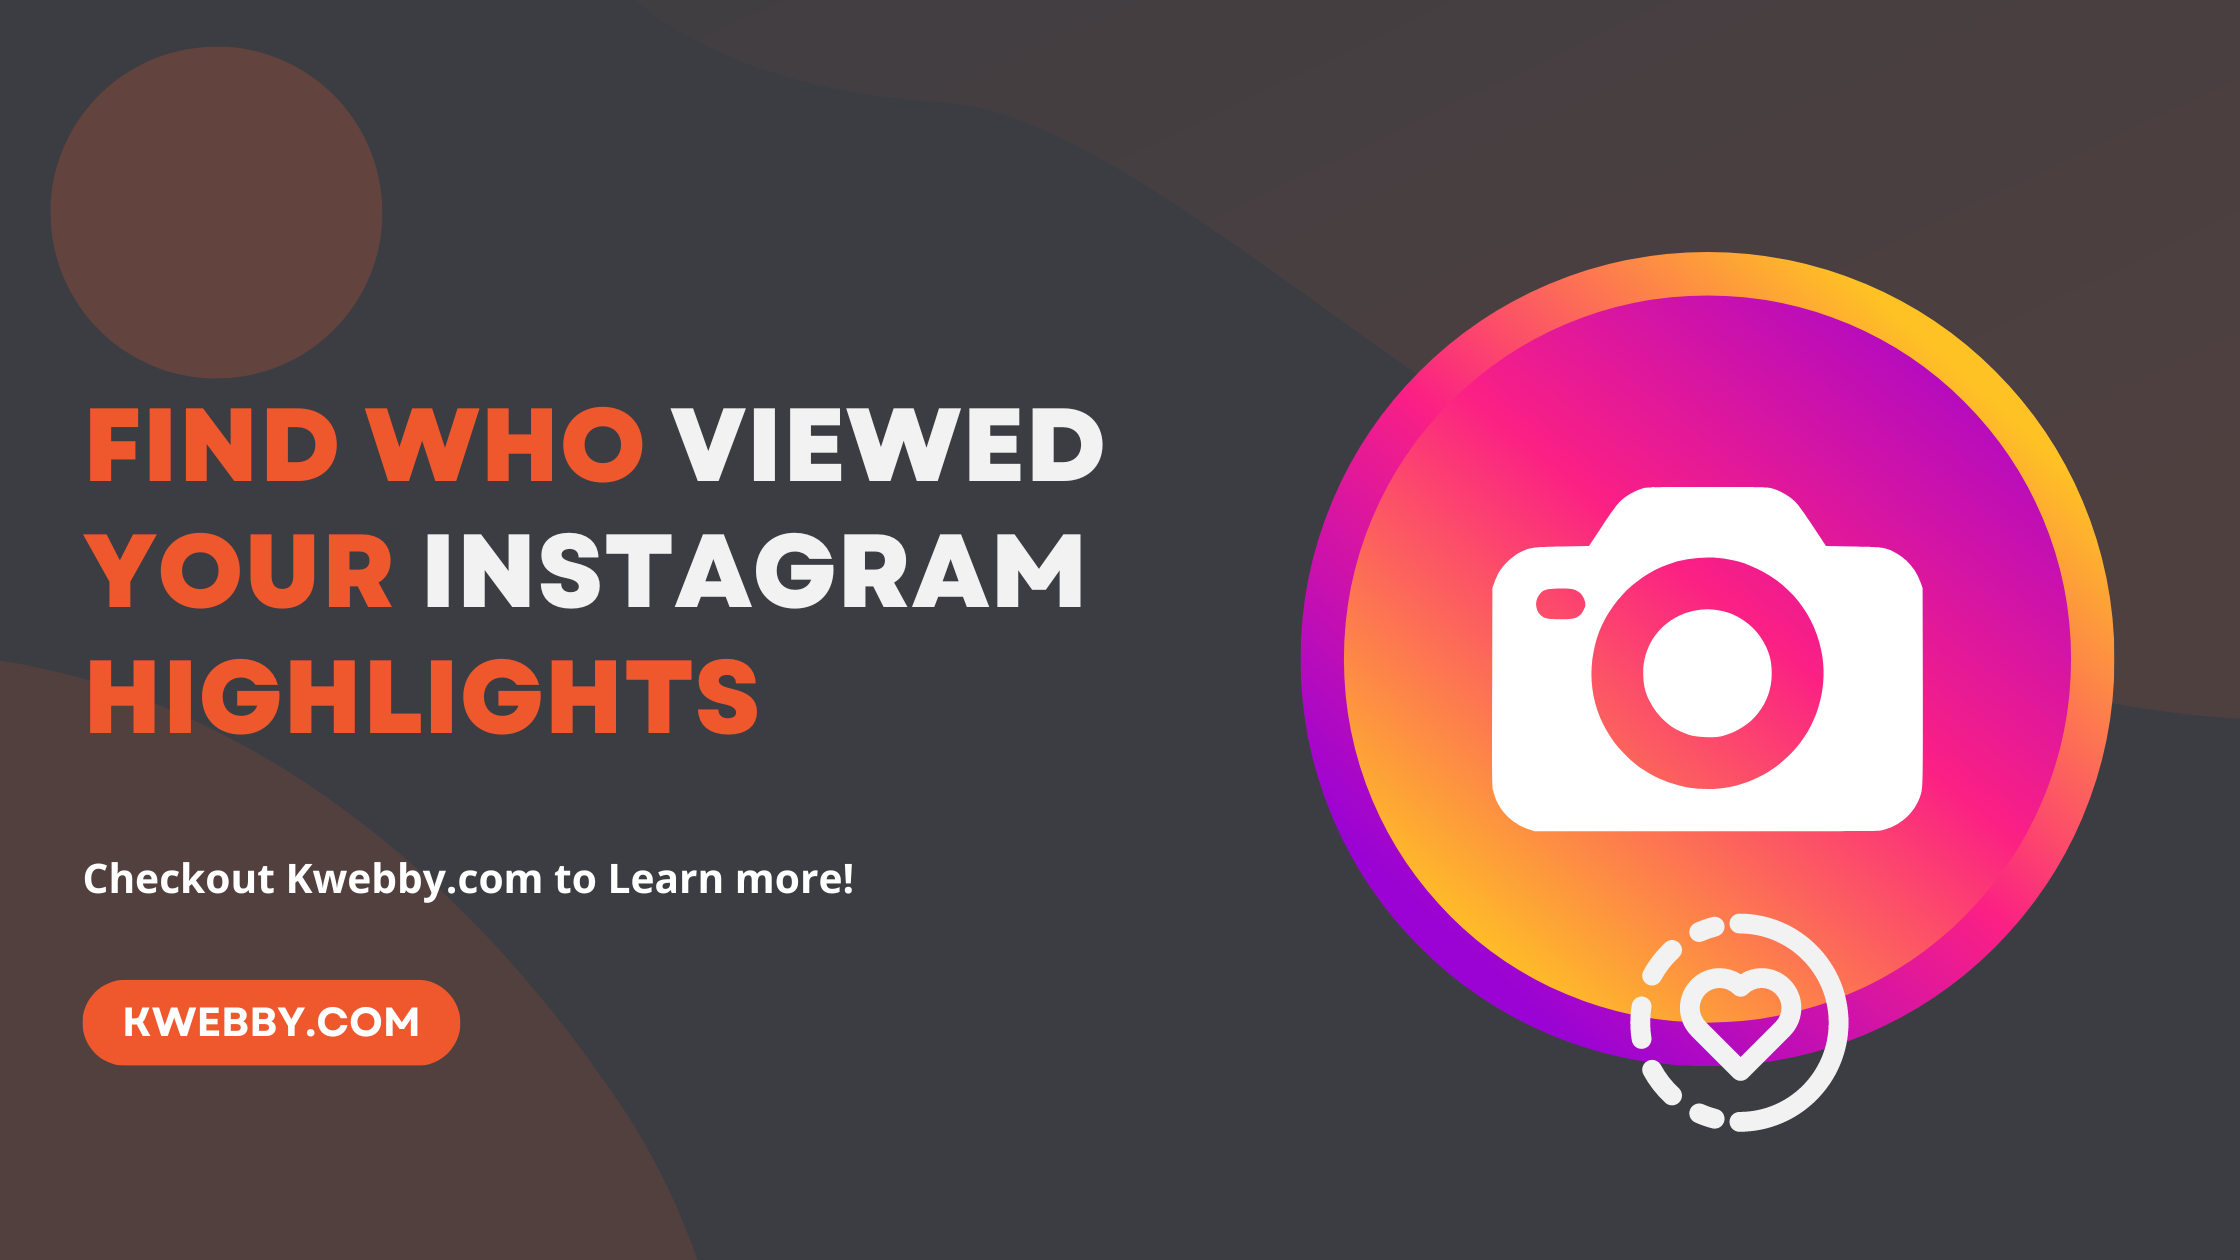 How to find who viewed your Instagram highlights